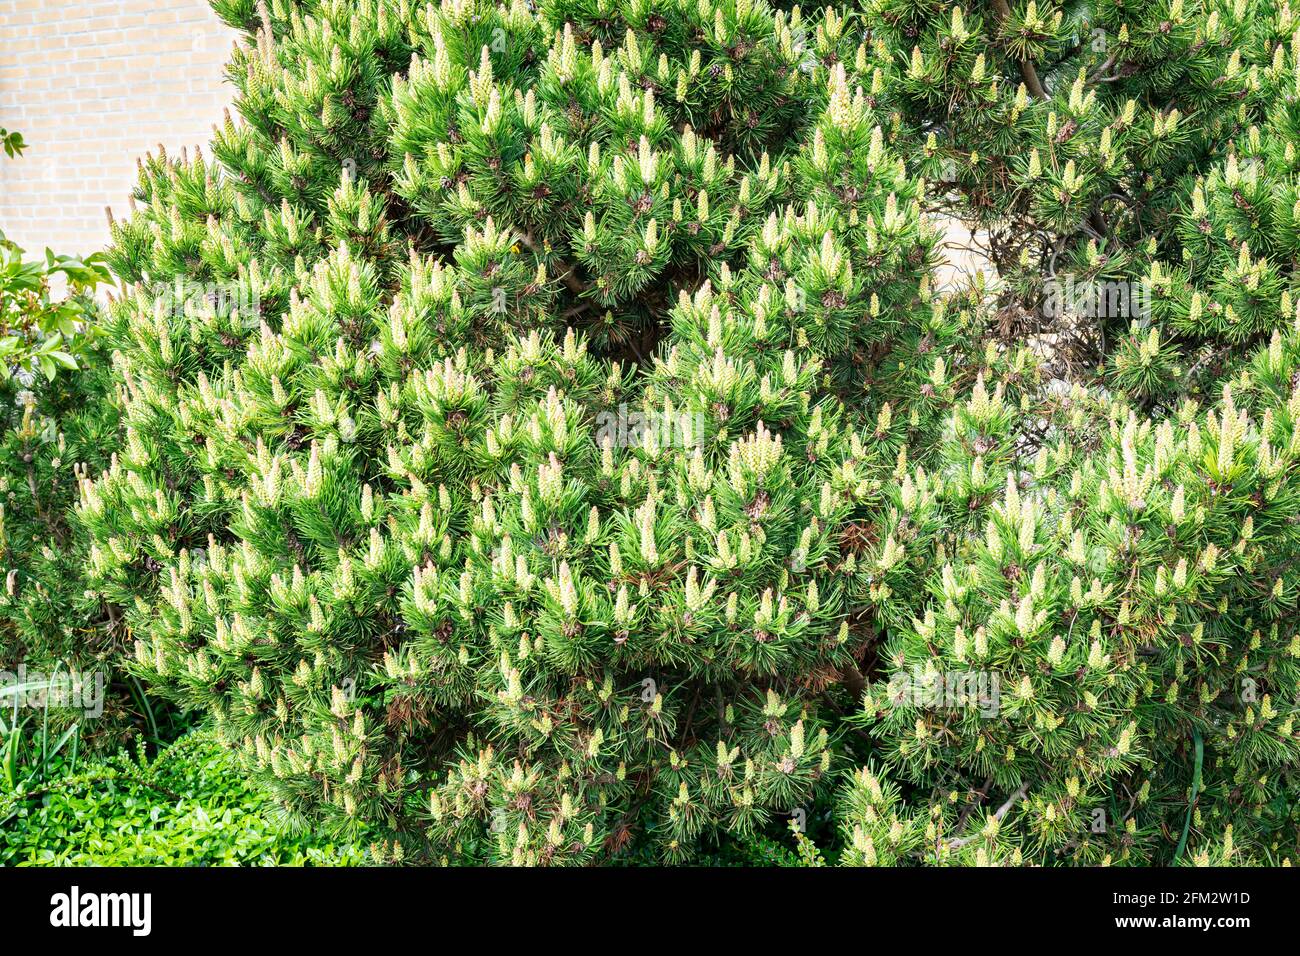 Mountain pine shrub (Pinus mugo) with candle formations in a garden Stock Photo